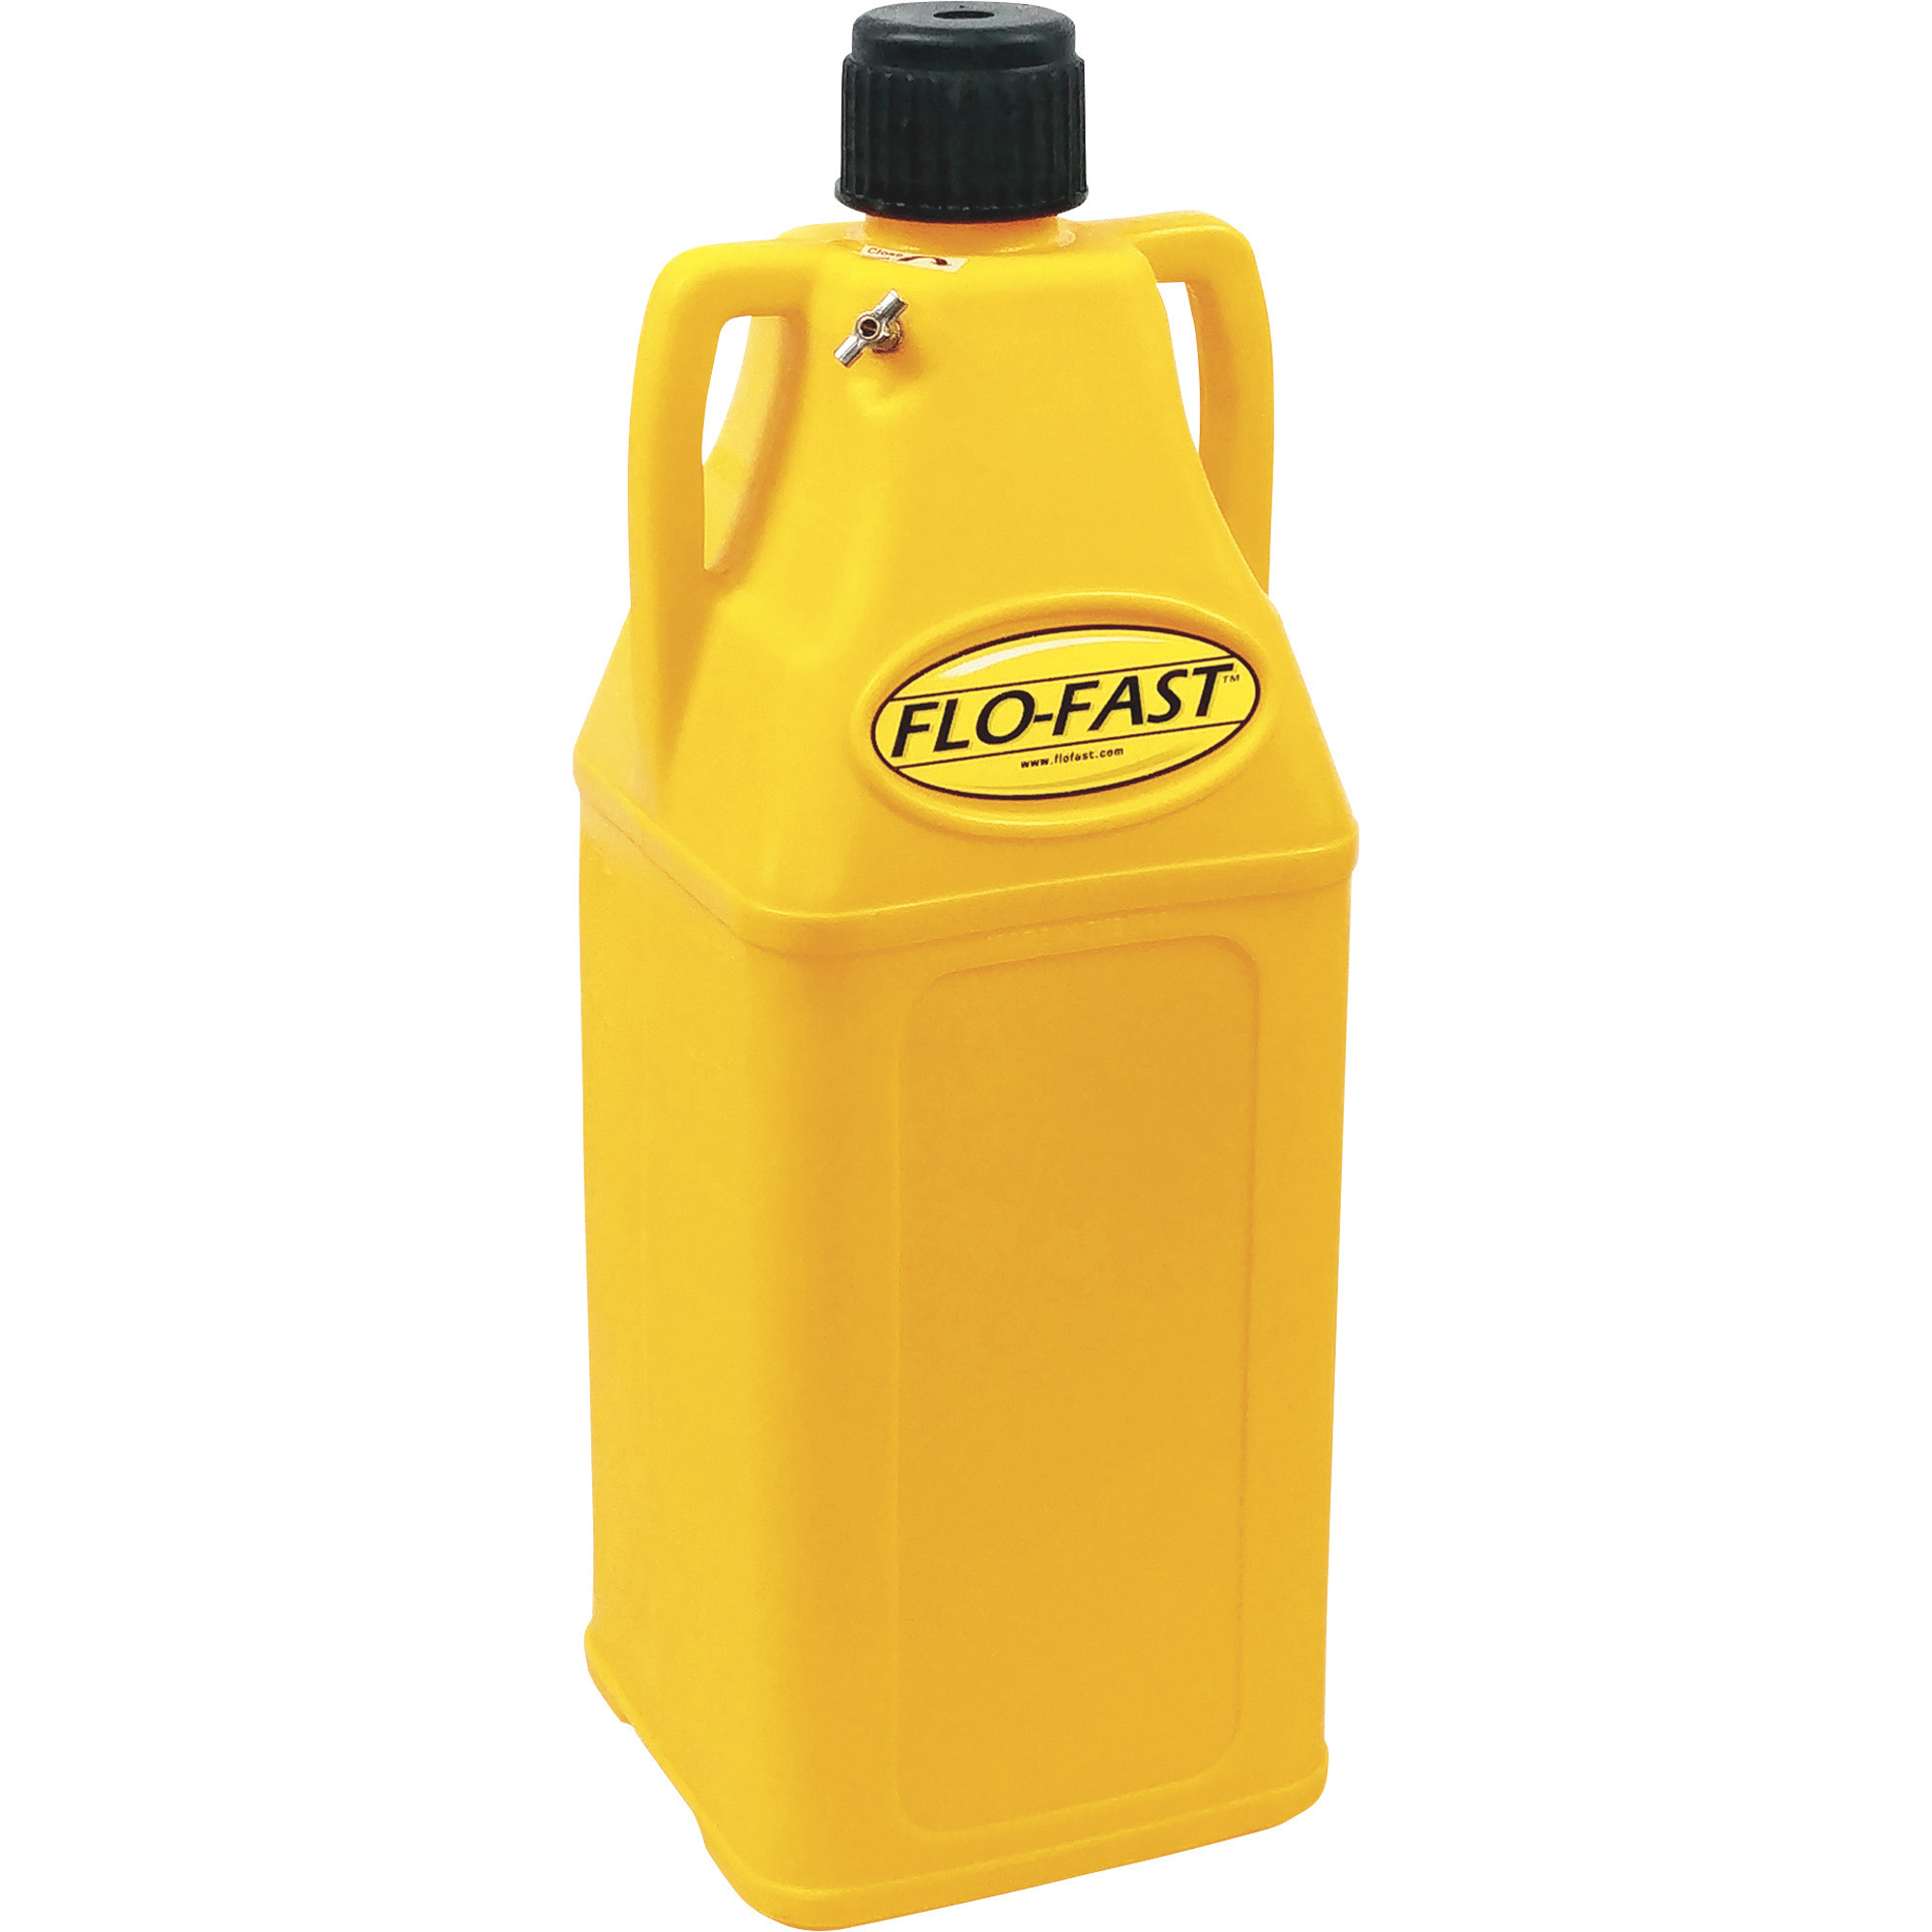 FLO-FAST Container, 10.5-Gallon, Yellow, For Diesel, Model 10504